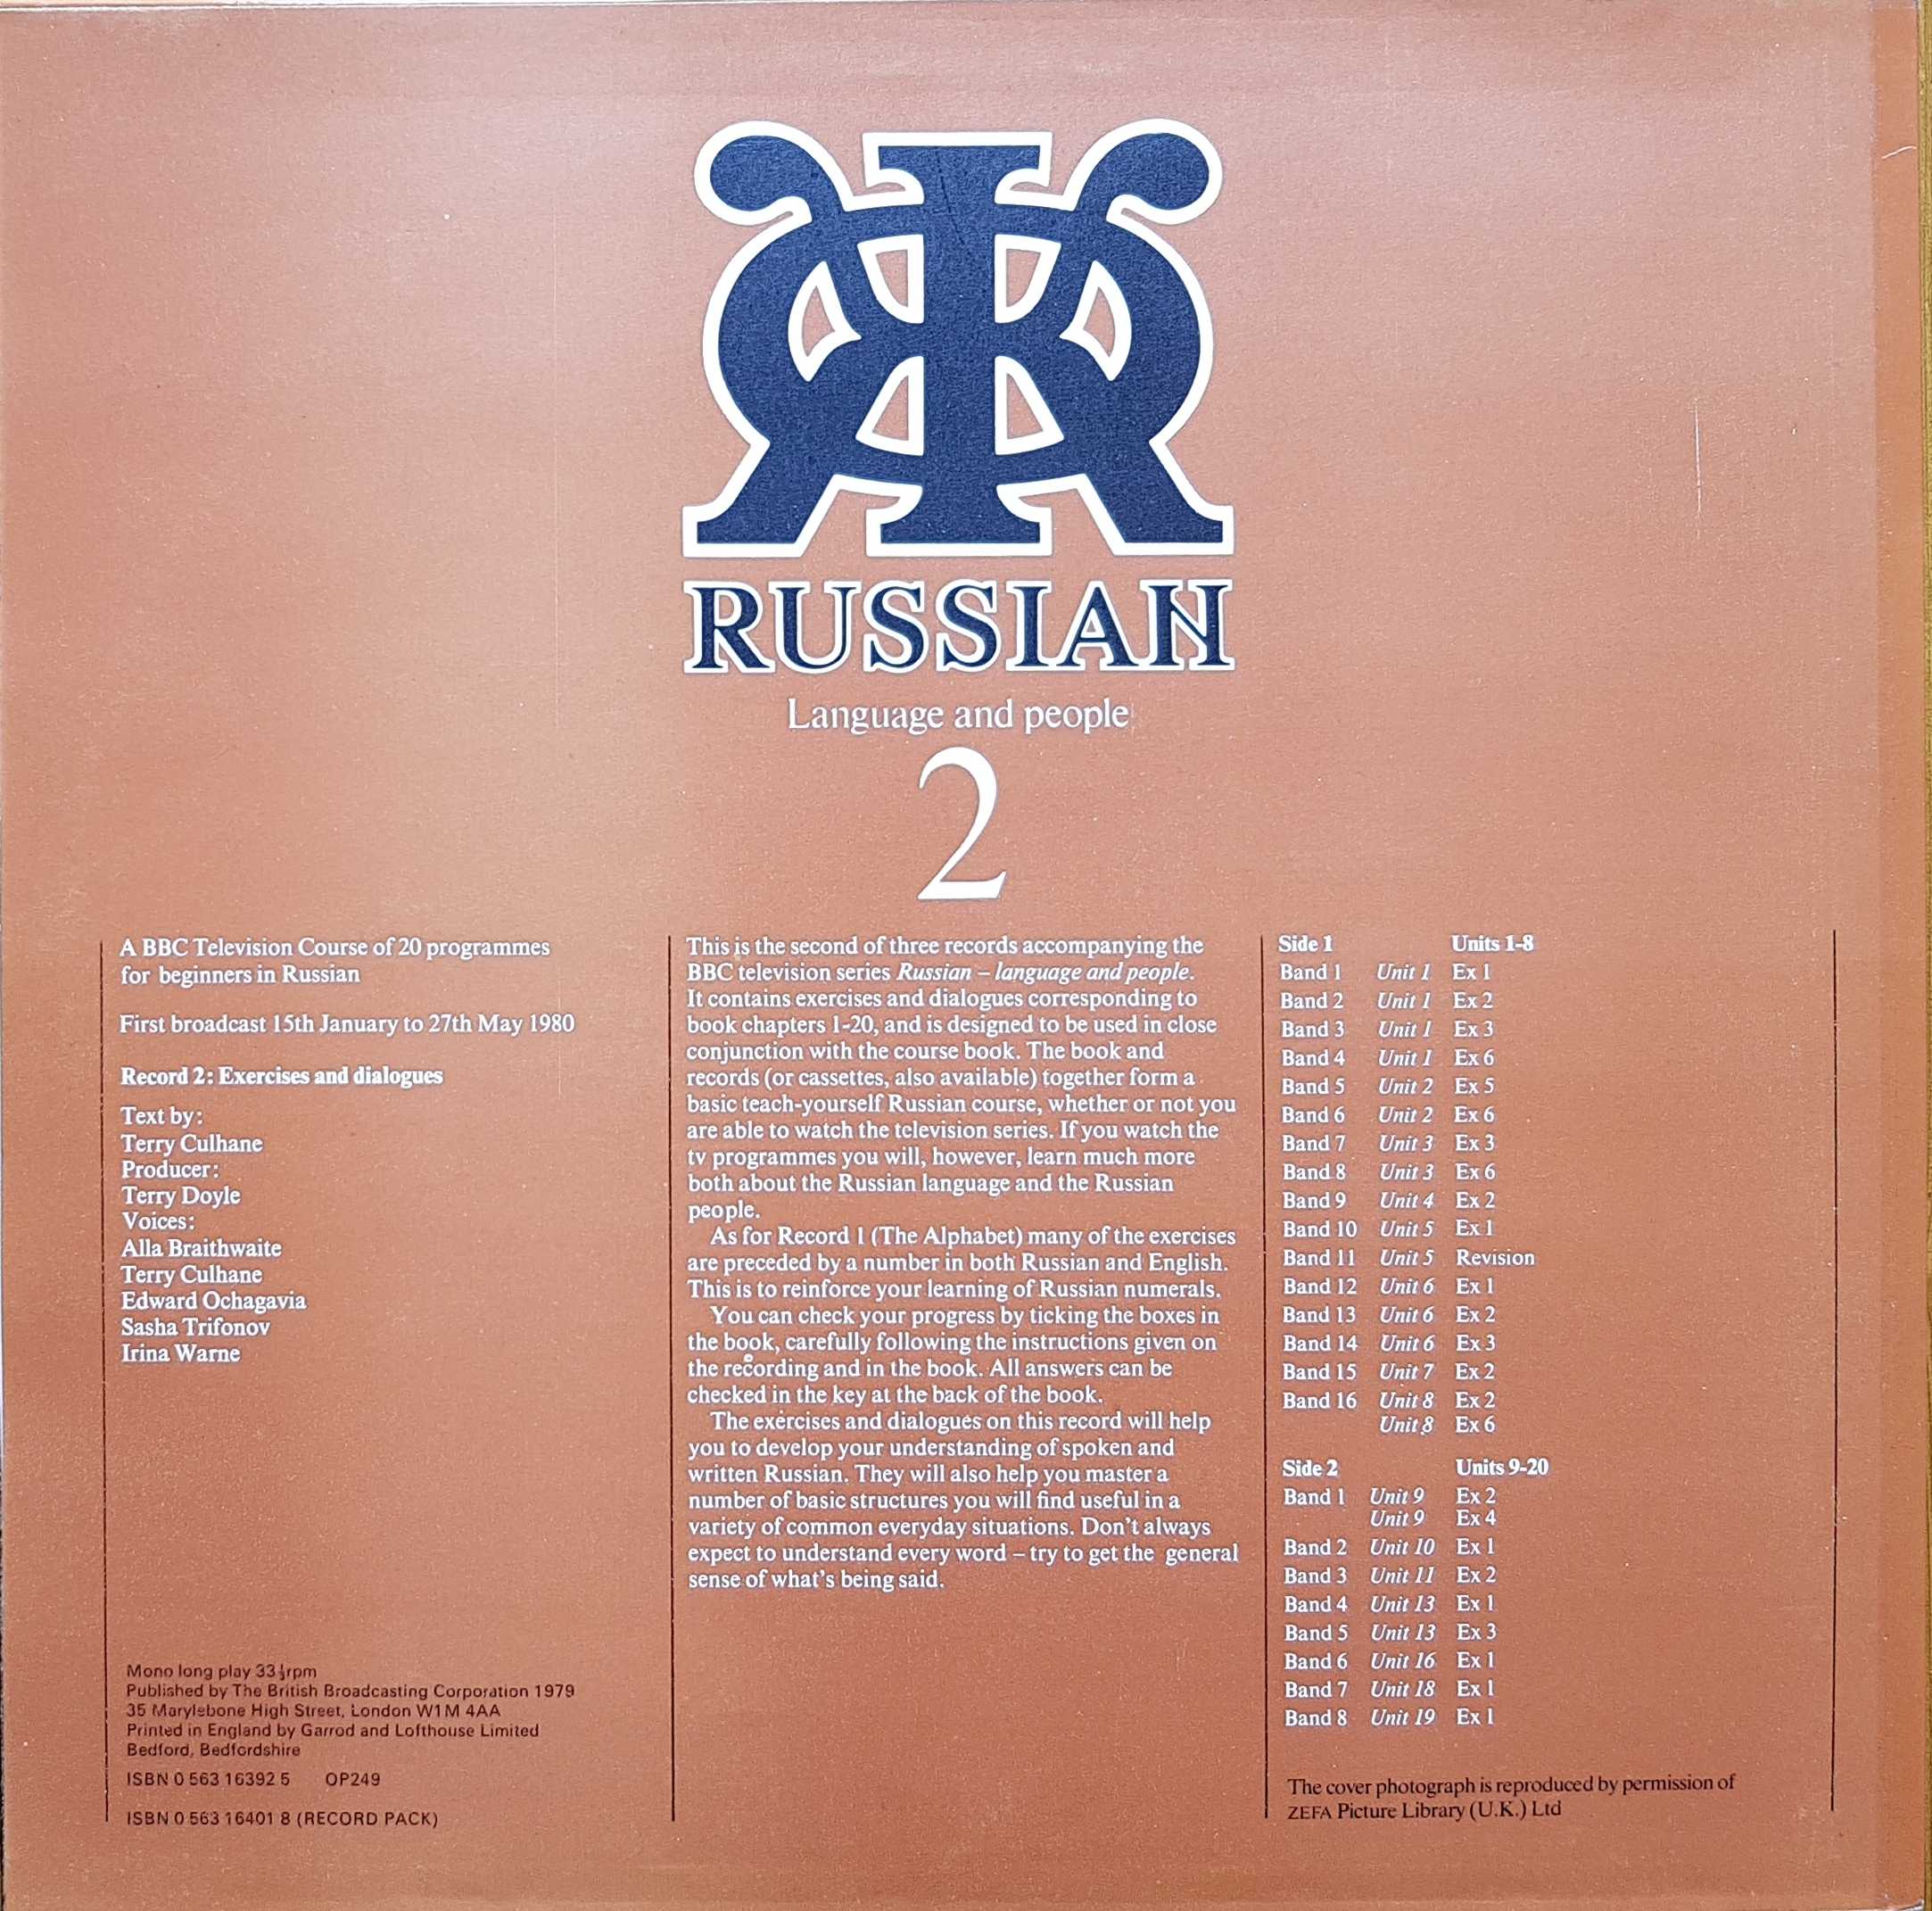 Picture of OP 249 Russian Language And People - Record 2 A self-instructional course for beginners in Russian by artist Terry Culhane from the BBC records and Tapes library